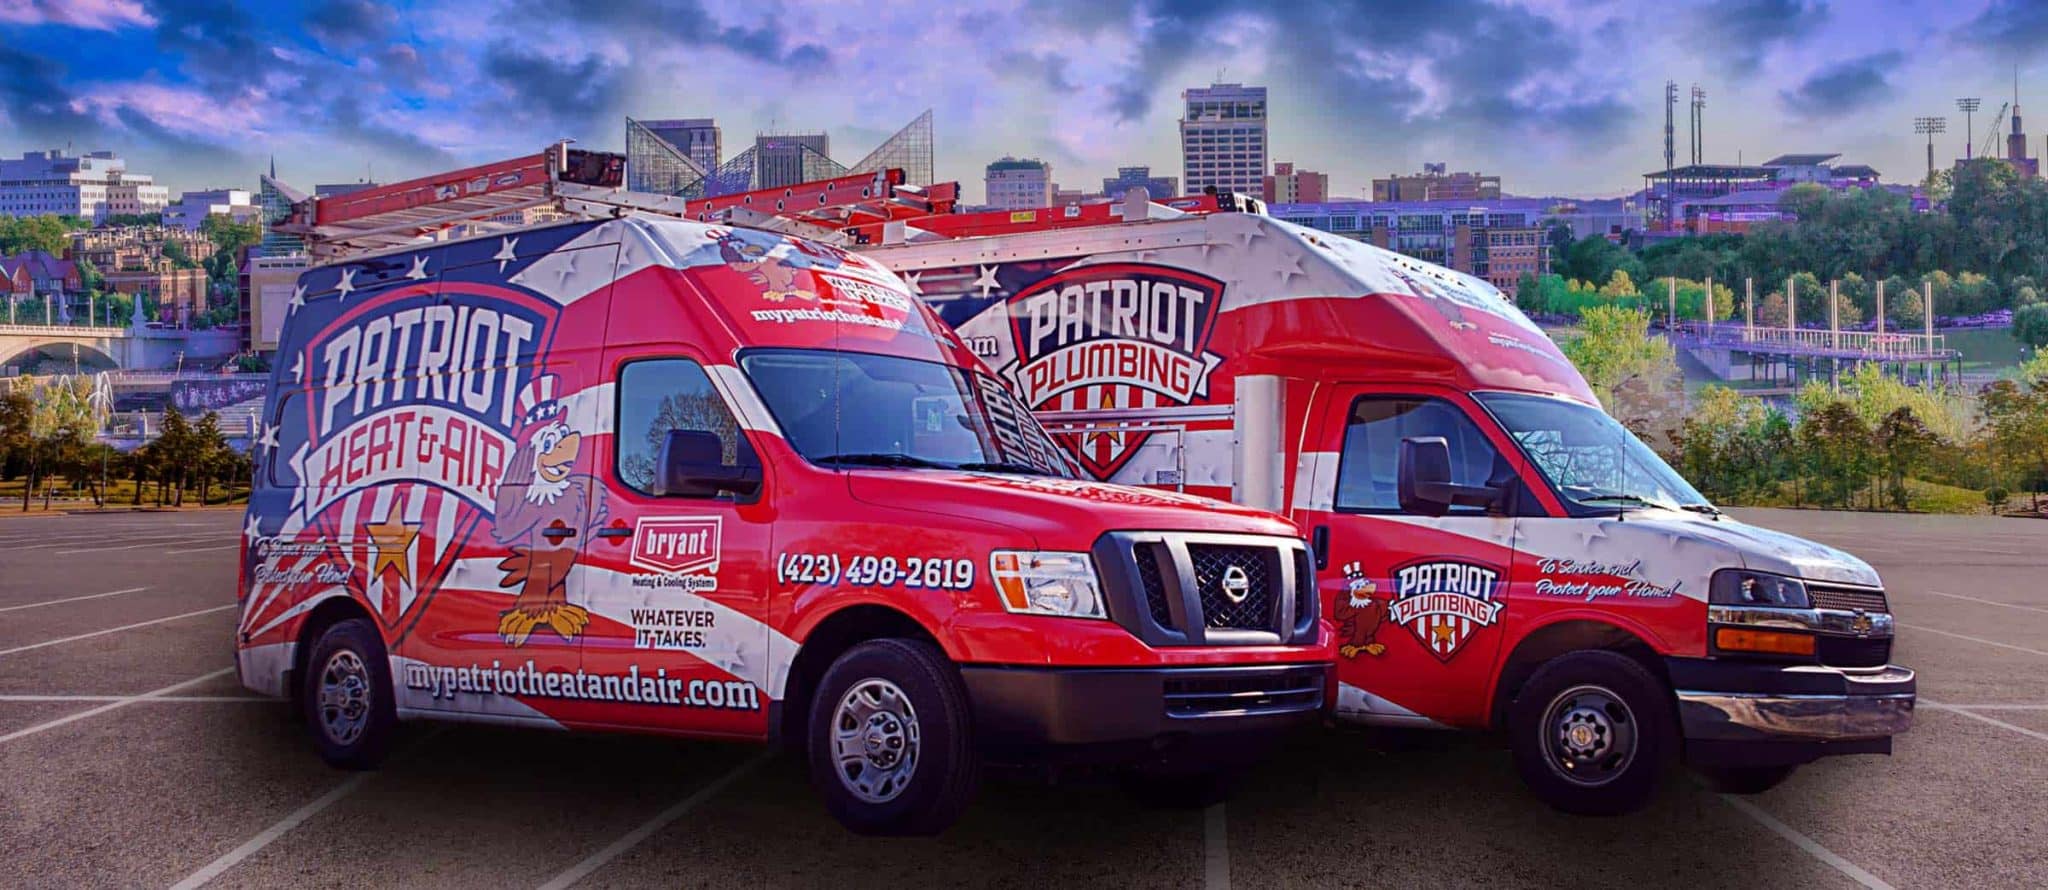 Plumbing Services Plumber in Chattanooga, TN | Patriot Plumbing | Plumber in Cleveland, TN Newsletter Sign Up